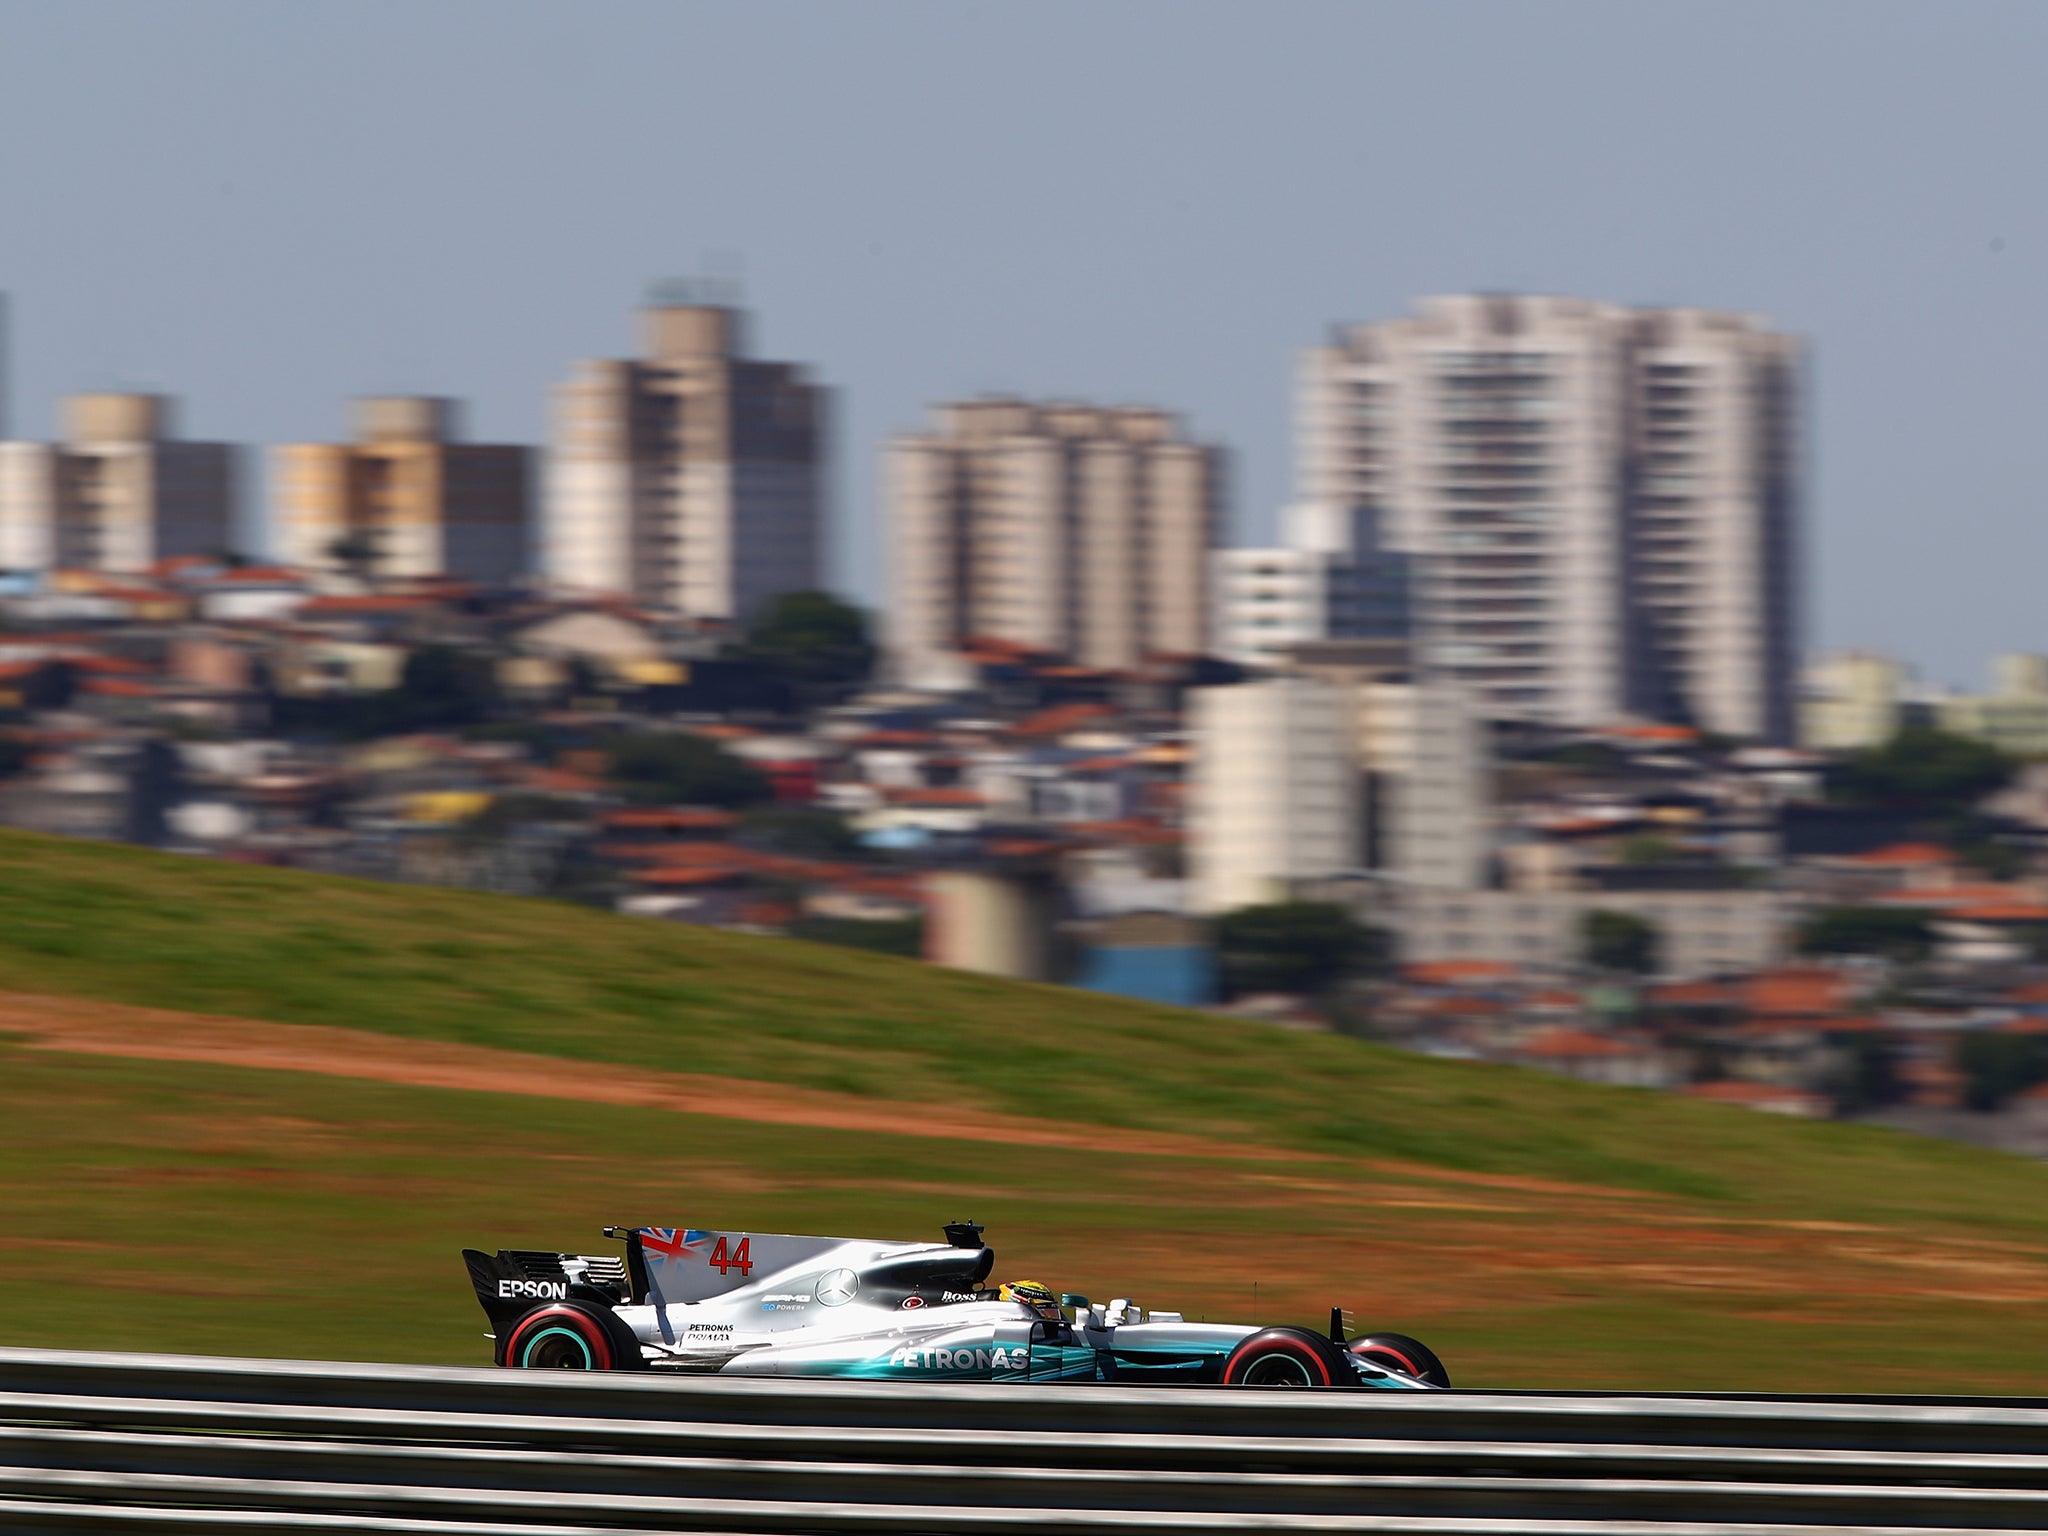 F1's future at Interlagos looks uncertain after a number of robbery attempts over the weekend